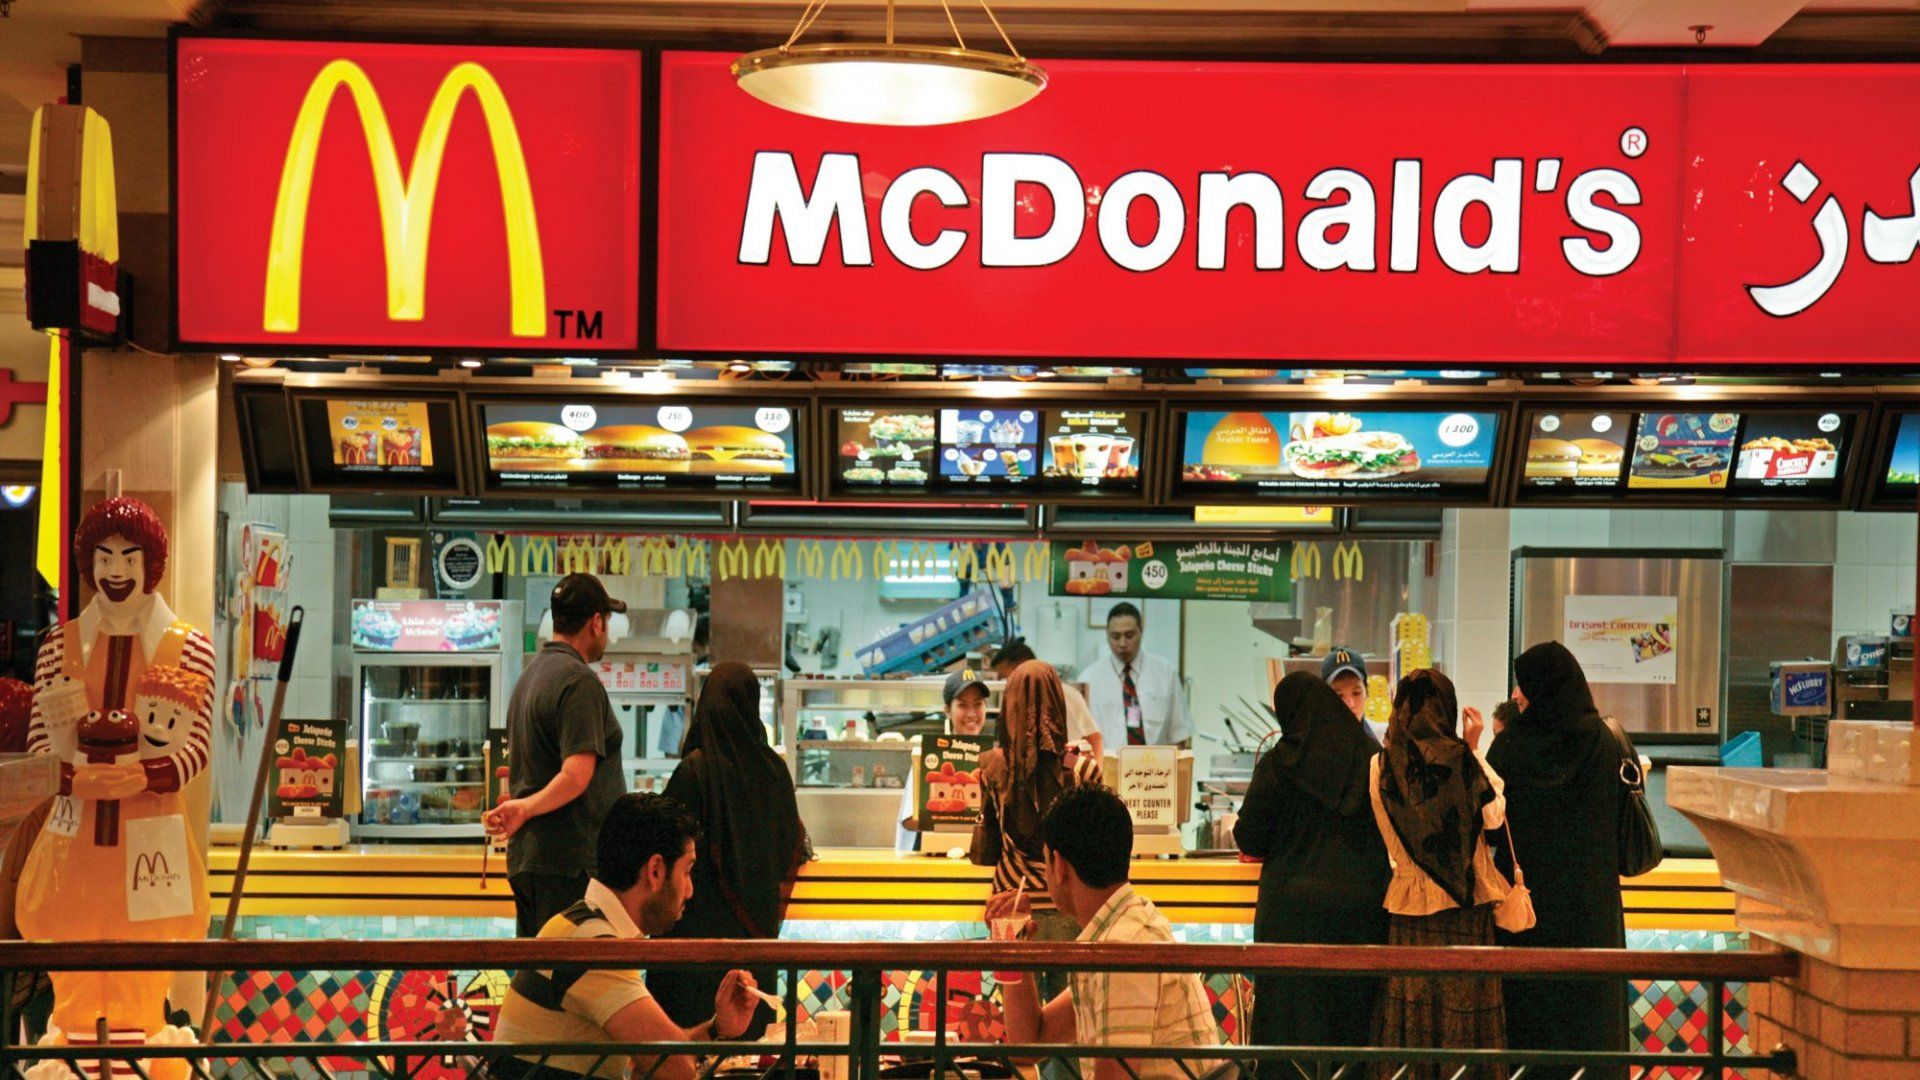 McDonald's and Starbucks Are Everywhere. Is Globalization Making Us All the Same?